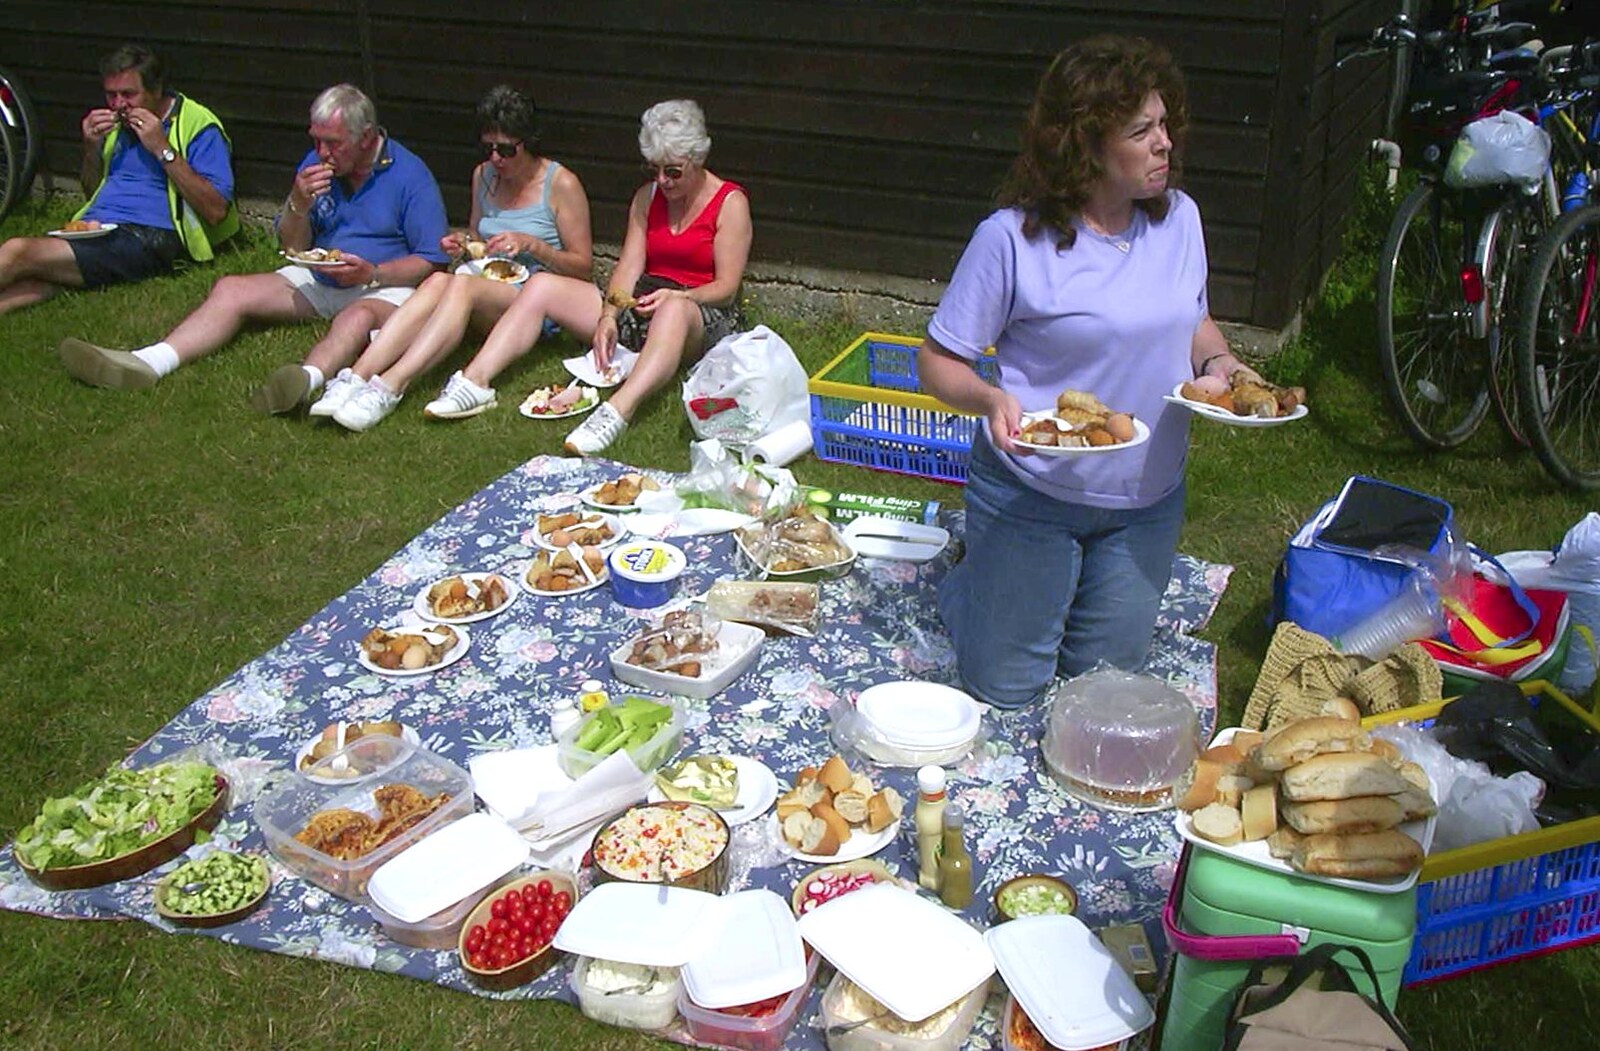 The BSCC Annual Bike Ride, Orford, Suffolk - 12th July 2003: Denny's got the picnic all laid out